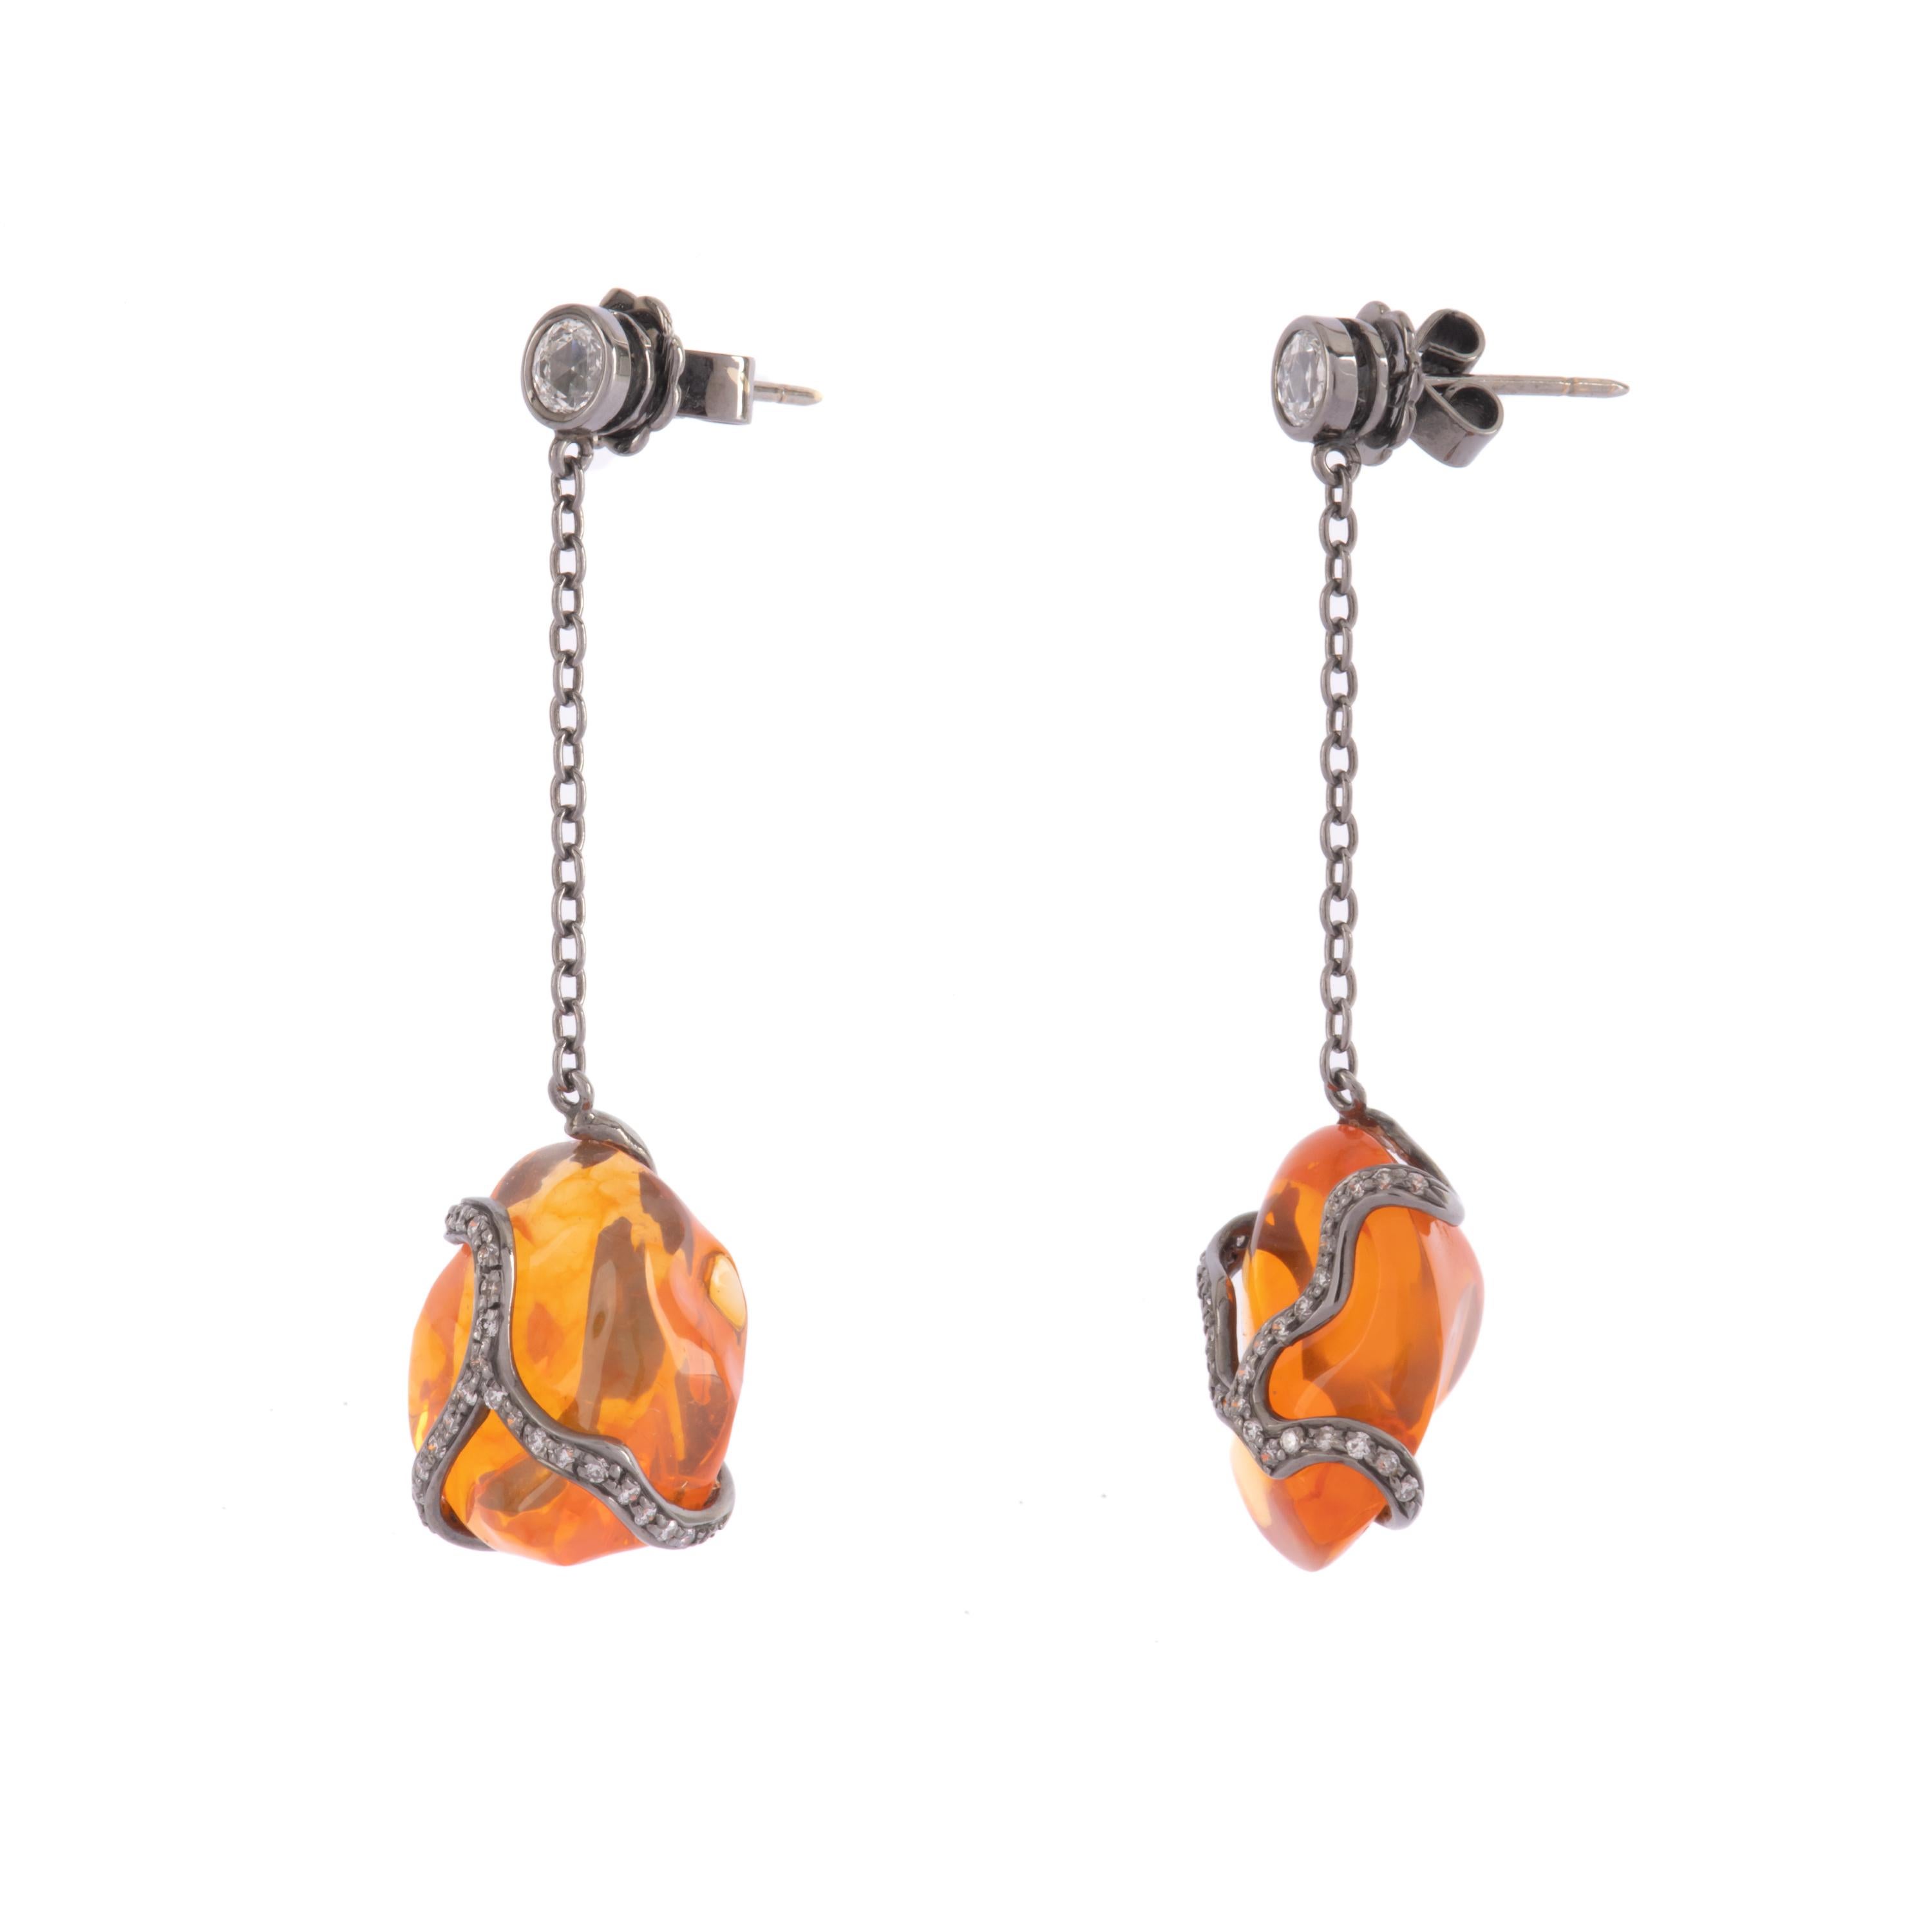 Black gold earrings featured two big fire opal and diamonds designed from Illario.
Tthey are perfect for a sporty night as well as elegant.
Fire opal 19.17 ct
Diamonds 0.76 ct